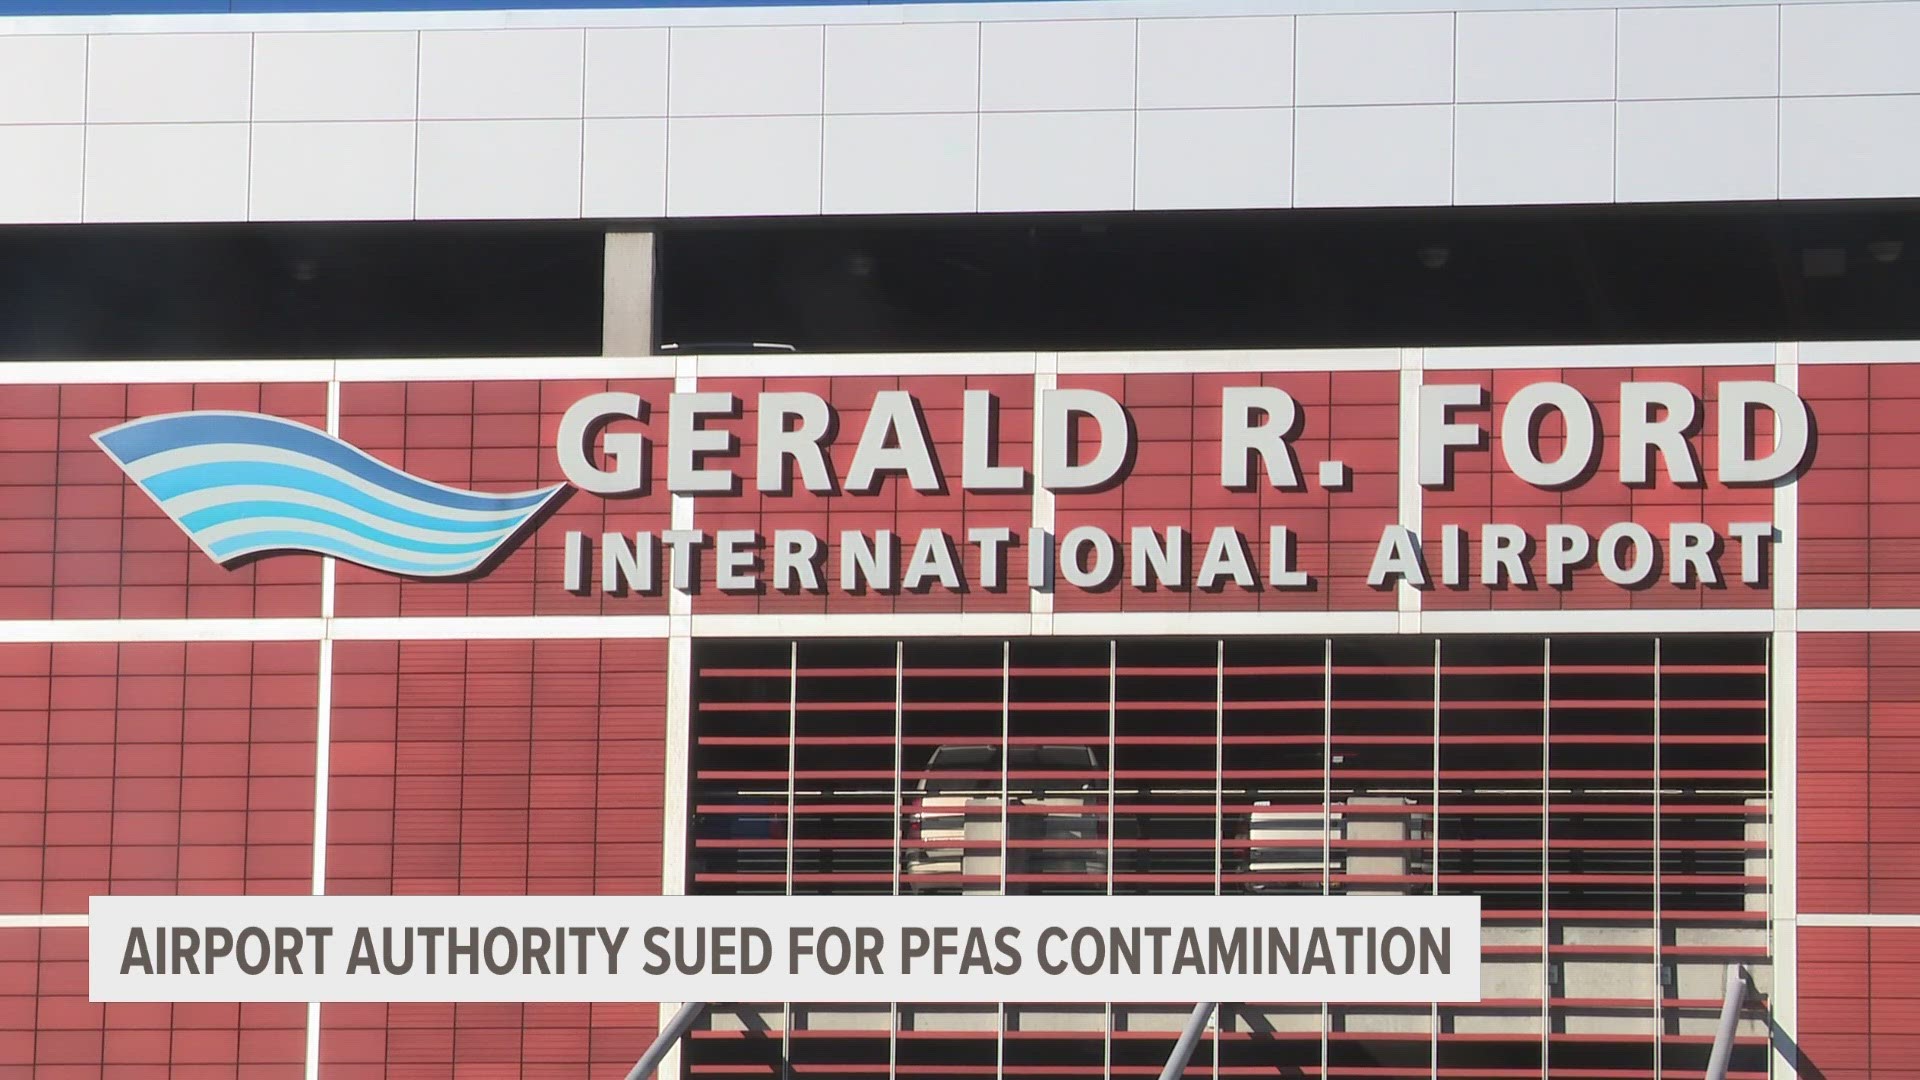 Attorney General Dana Nessel is suing the Airport Authority following repeated warnings and demands over PFAS contamination.